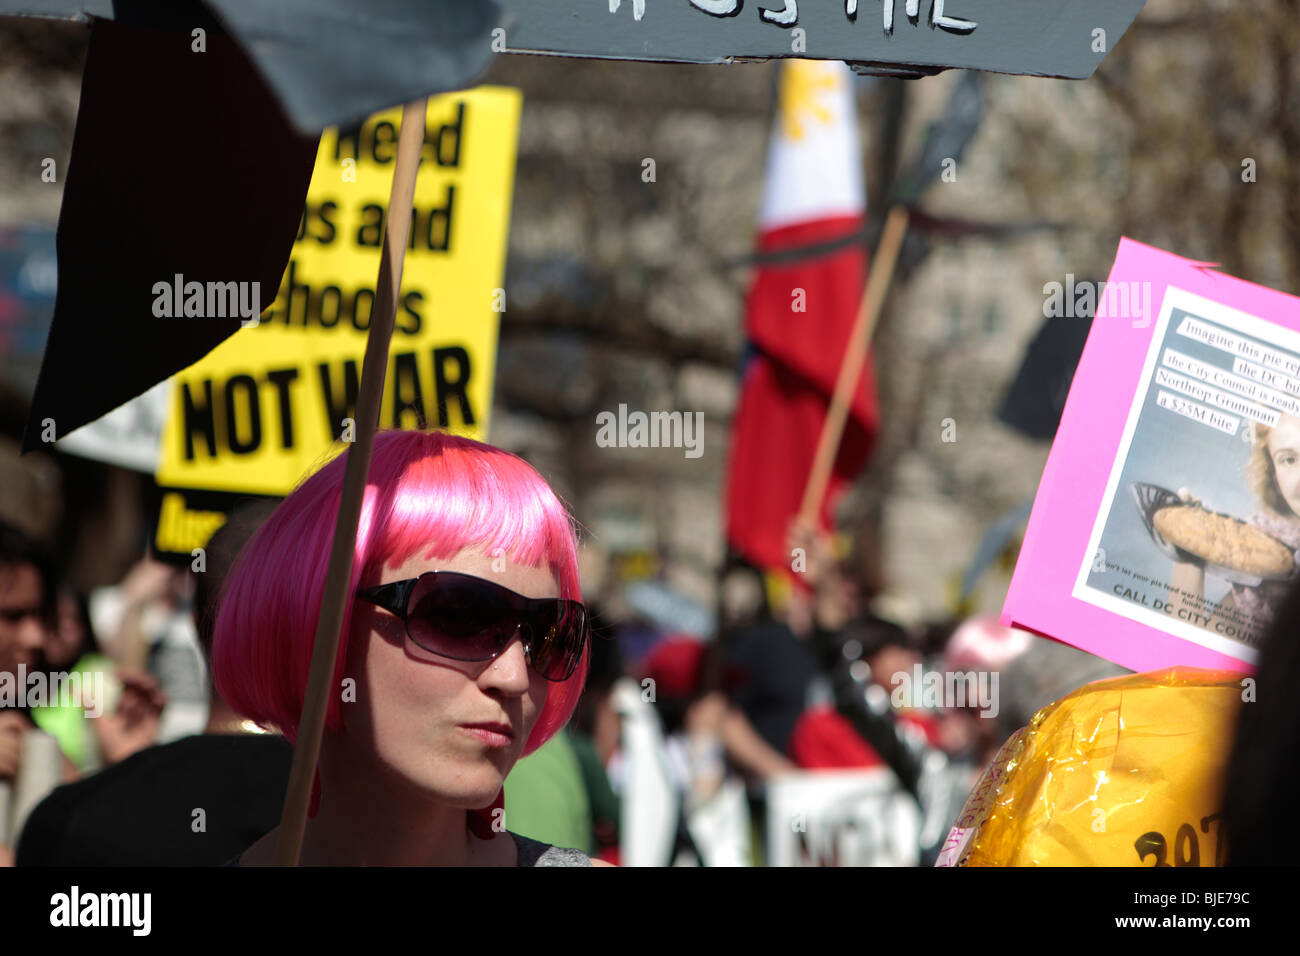 Code Pink activist with wig. Anti-war protest. March On Washington. March 20, 2010 Stock Photo